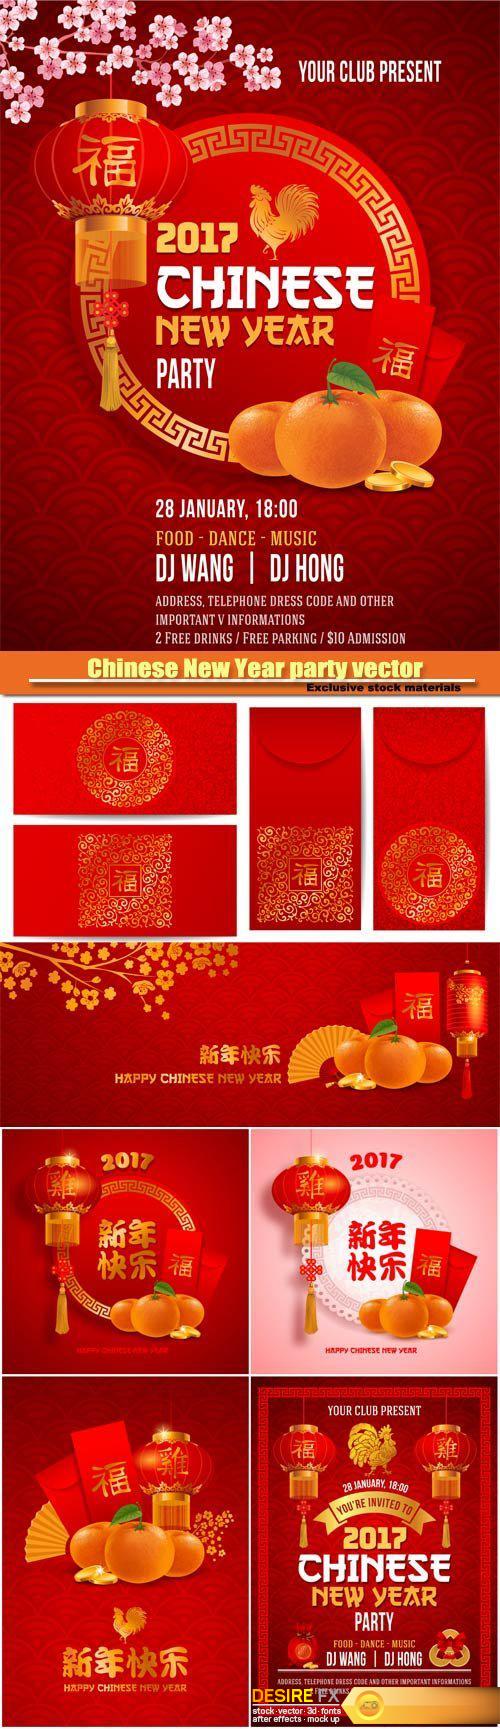 Chinese New Year party vector background